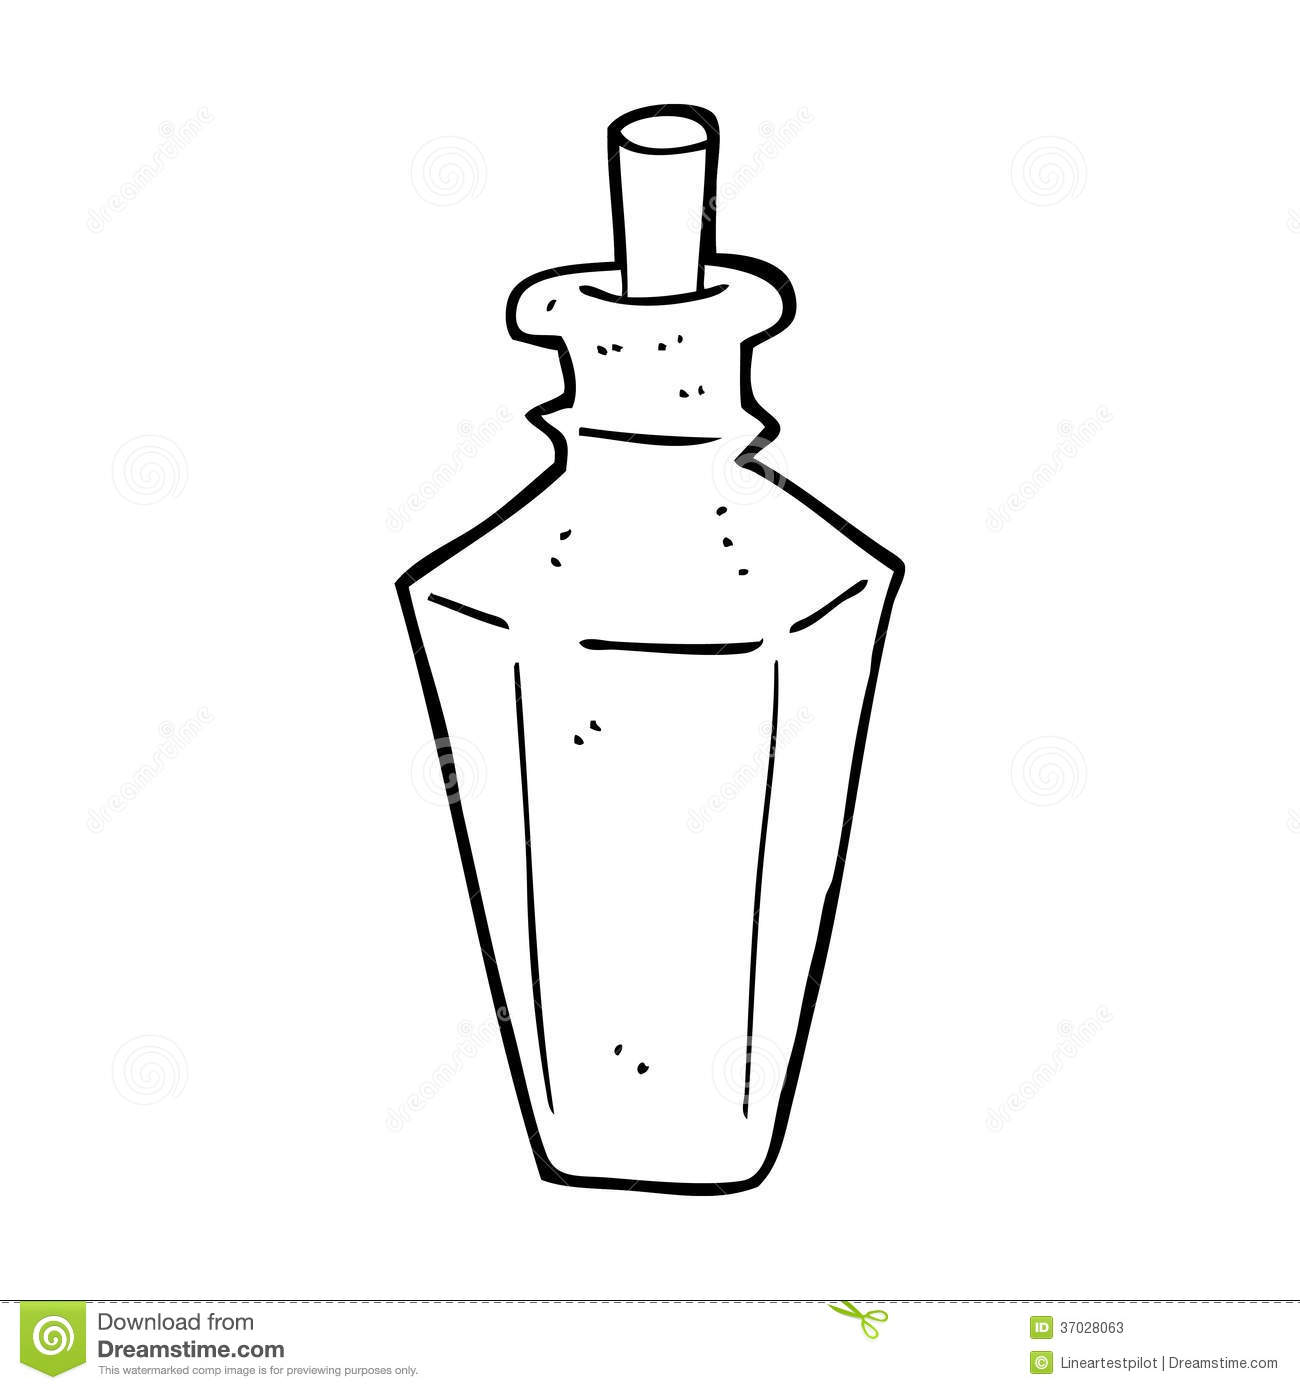 Perfume clipart black and white 10 » Clipart Station.